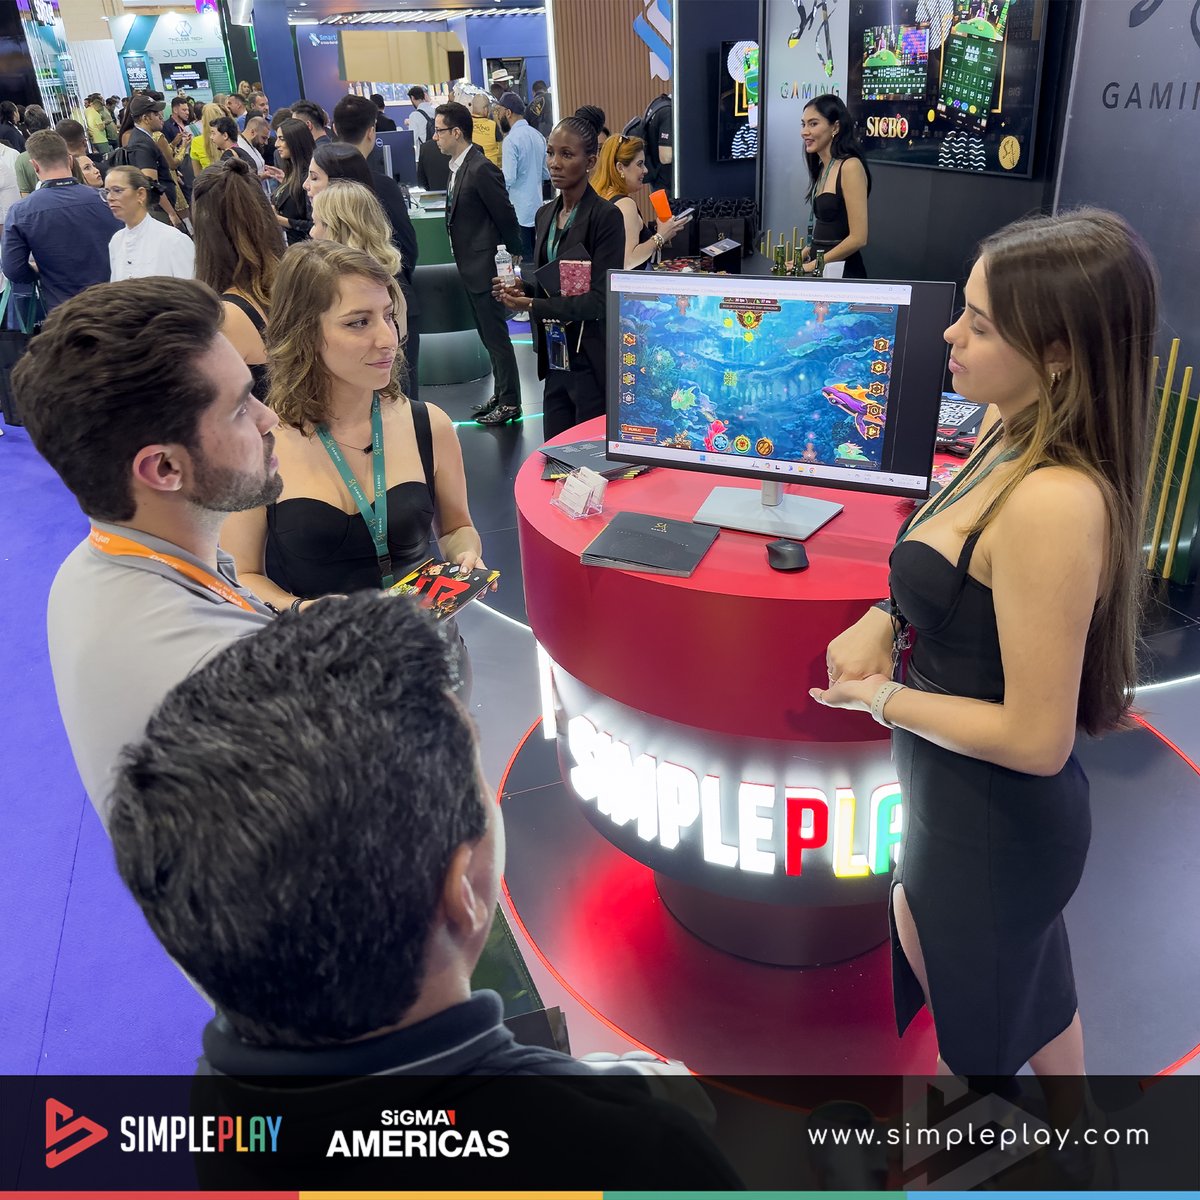 It has been a very busy day for SimplePlay!

We have met a lot new and friendly faces, and made a lot of plans and deals!

Looking forward to seeing you tomorrow at C105!

#SimplePlay #SlotGames #FishingGames #TableGames #SiGMAAmericas #SiGMA2024